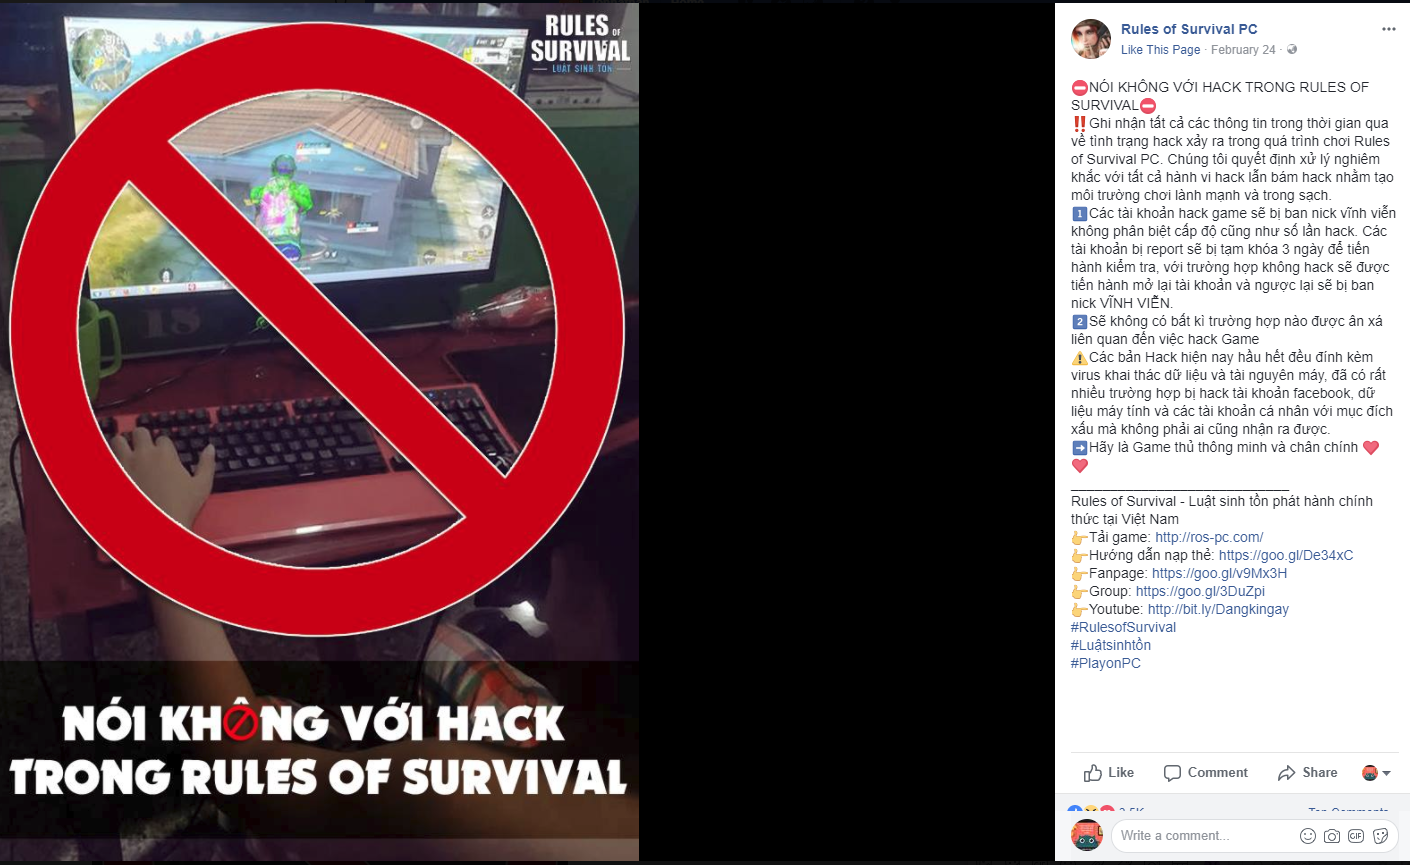 rules-of-survival-hack-2game-anh-2.png (1410×865)